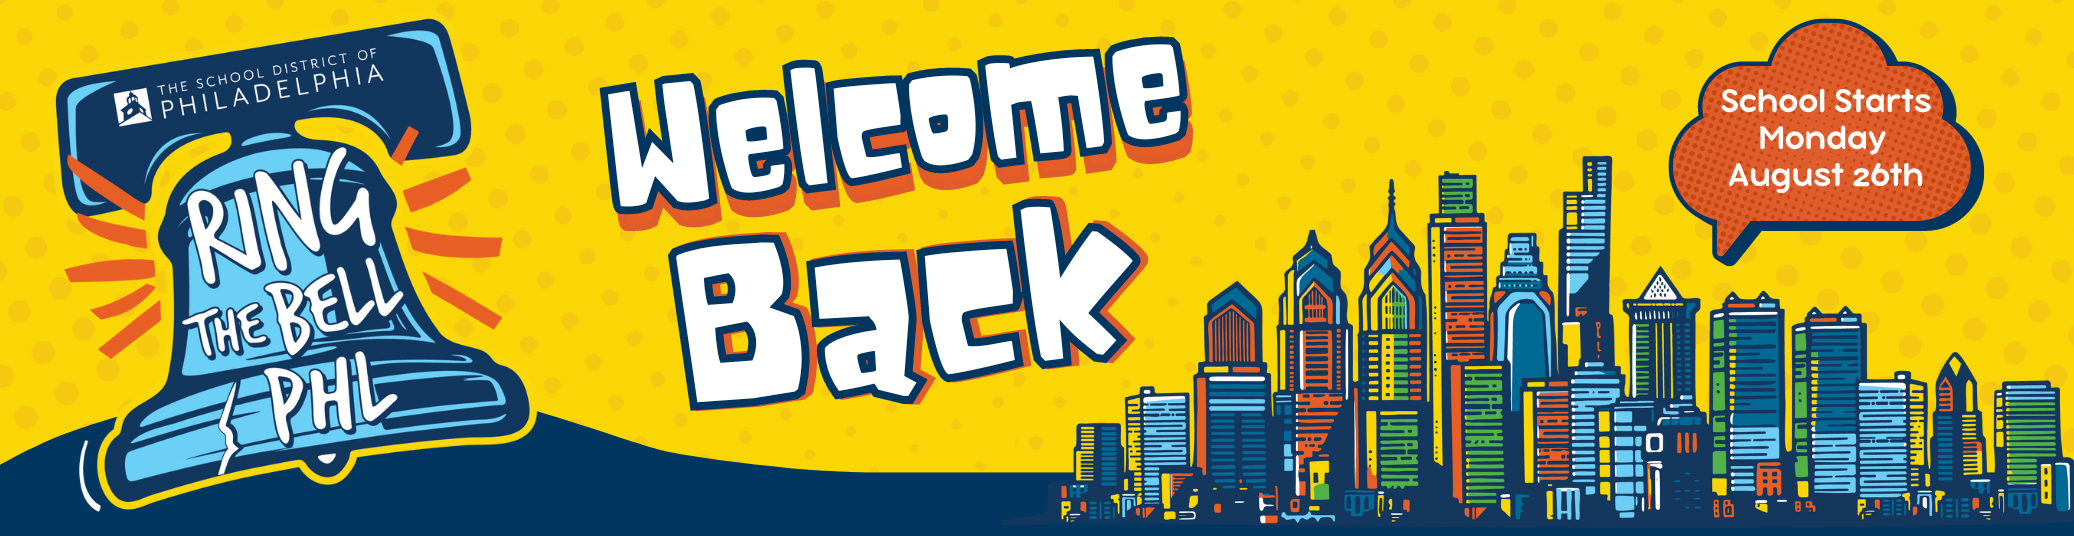 Welcome Back School starts August 26